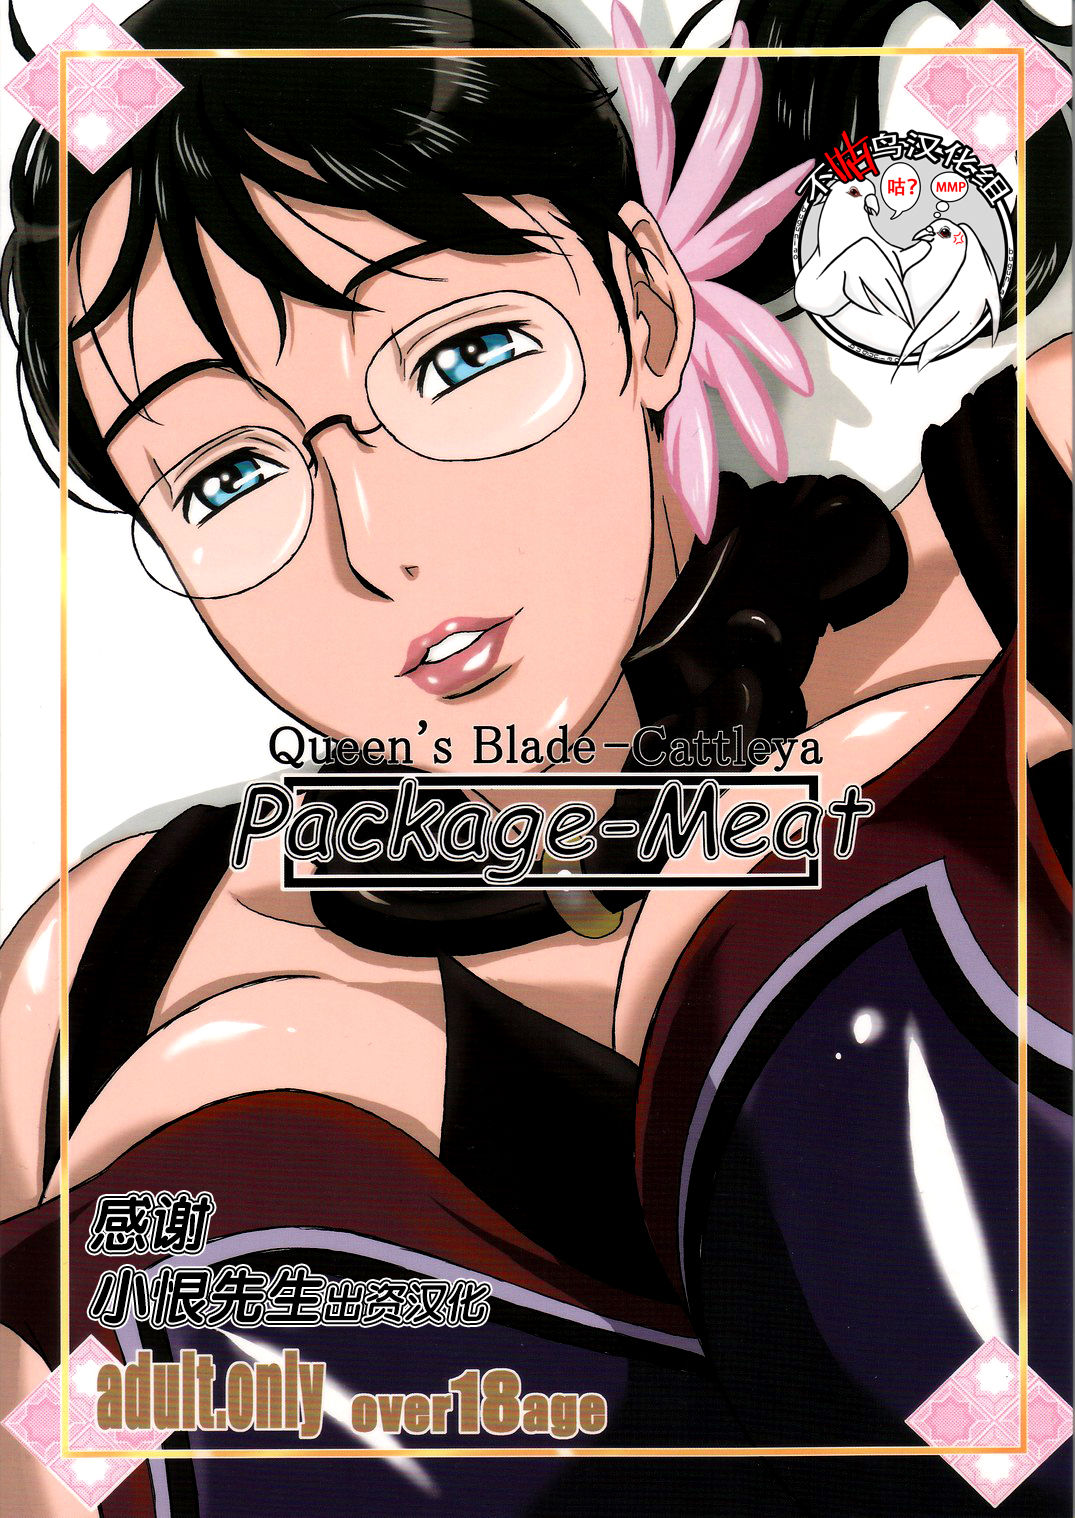 (C72) [Shiawase Pullin Dou (Ninroku)] Package Meat (Queen's Blade) [Chinese] amateur coloring version (C72) [しあわせプリン堂 (認六)] Package-Meat (クイーンズブレイド) [中国翻訳] 業餘上色版